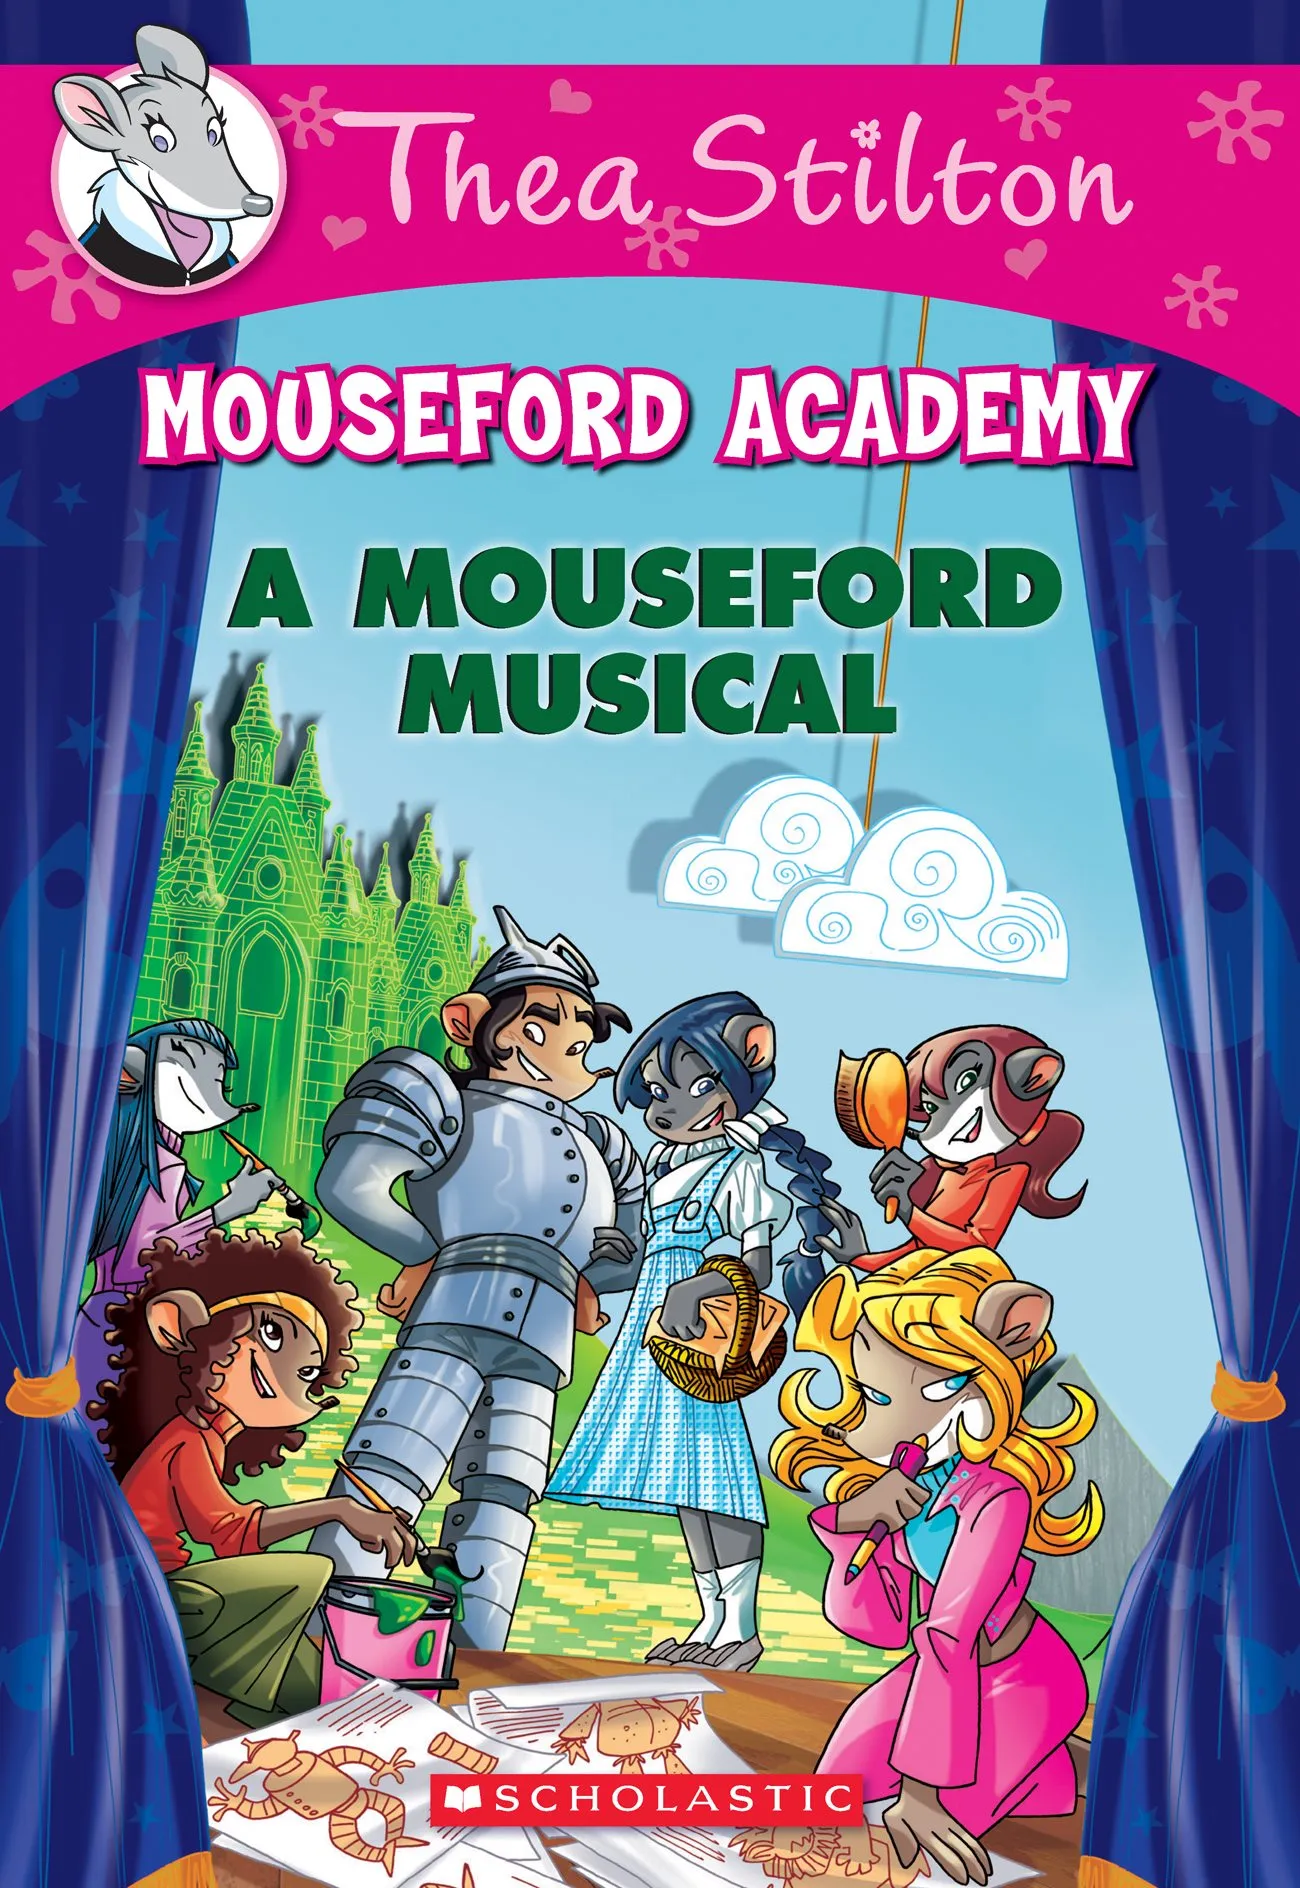 A Mouseford Musical (Thea Stilton Mouseford Academy #6)